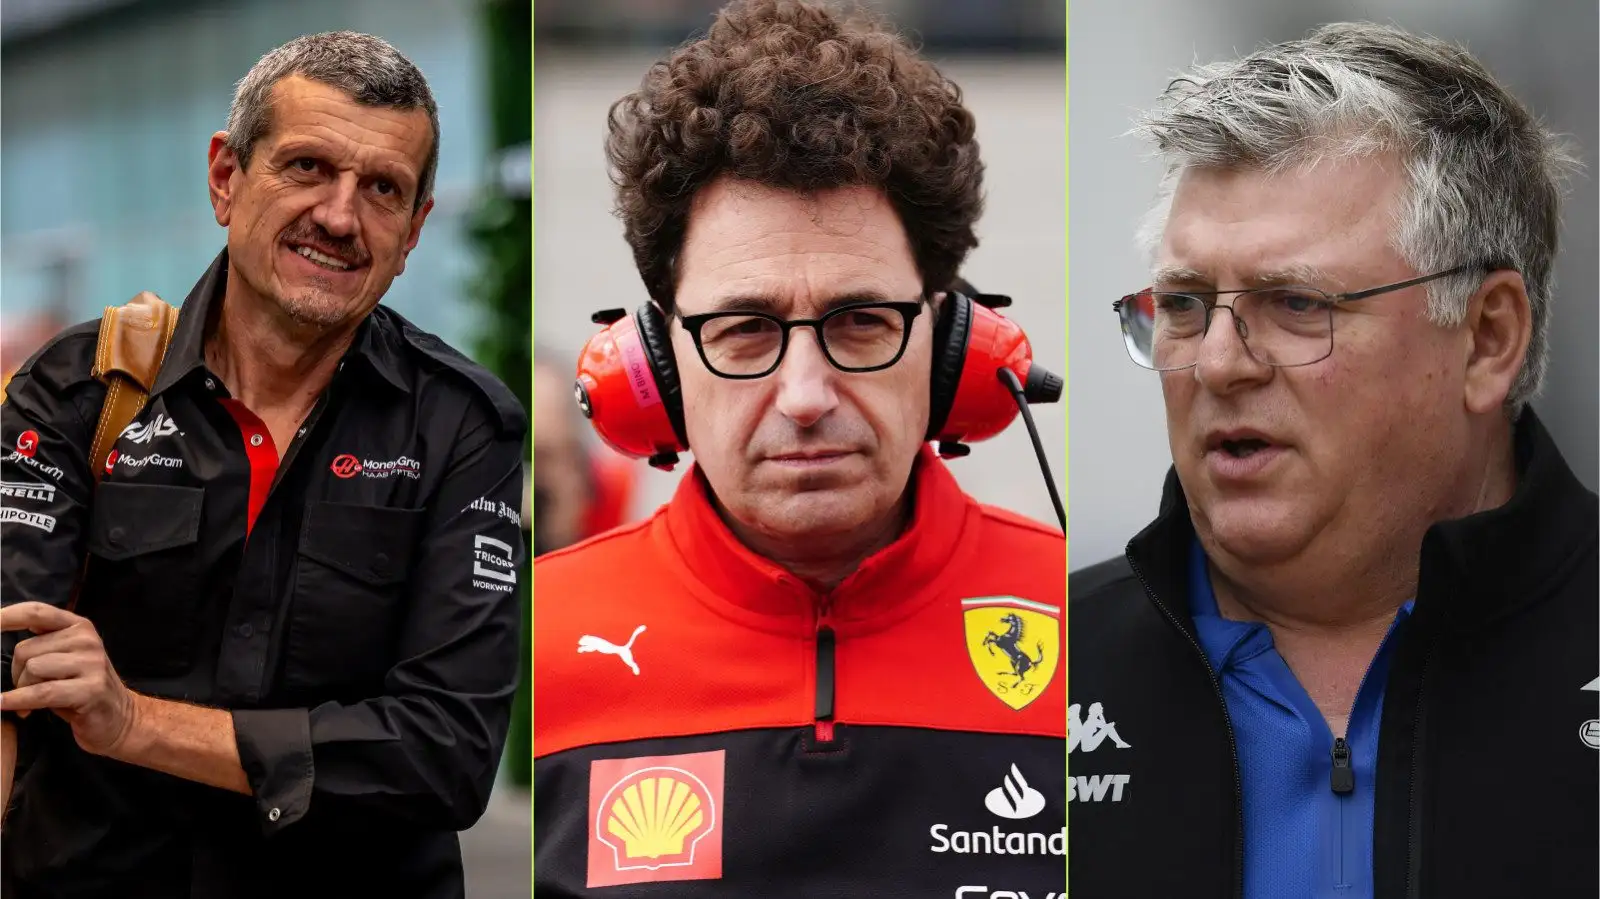 Guenther Steiner, Mattia Binotto, and Otmar Szafnauer have all lost their F1 team boss roles in the last 12 months.